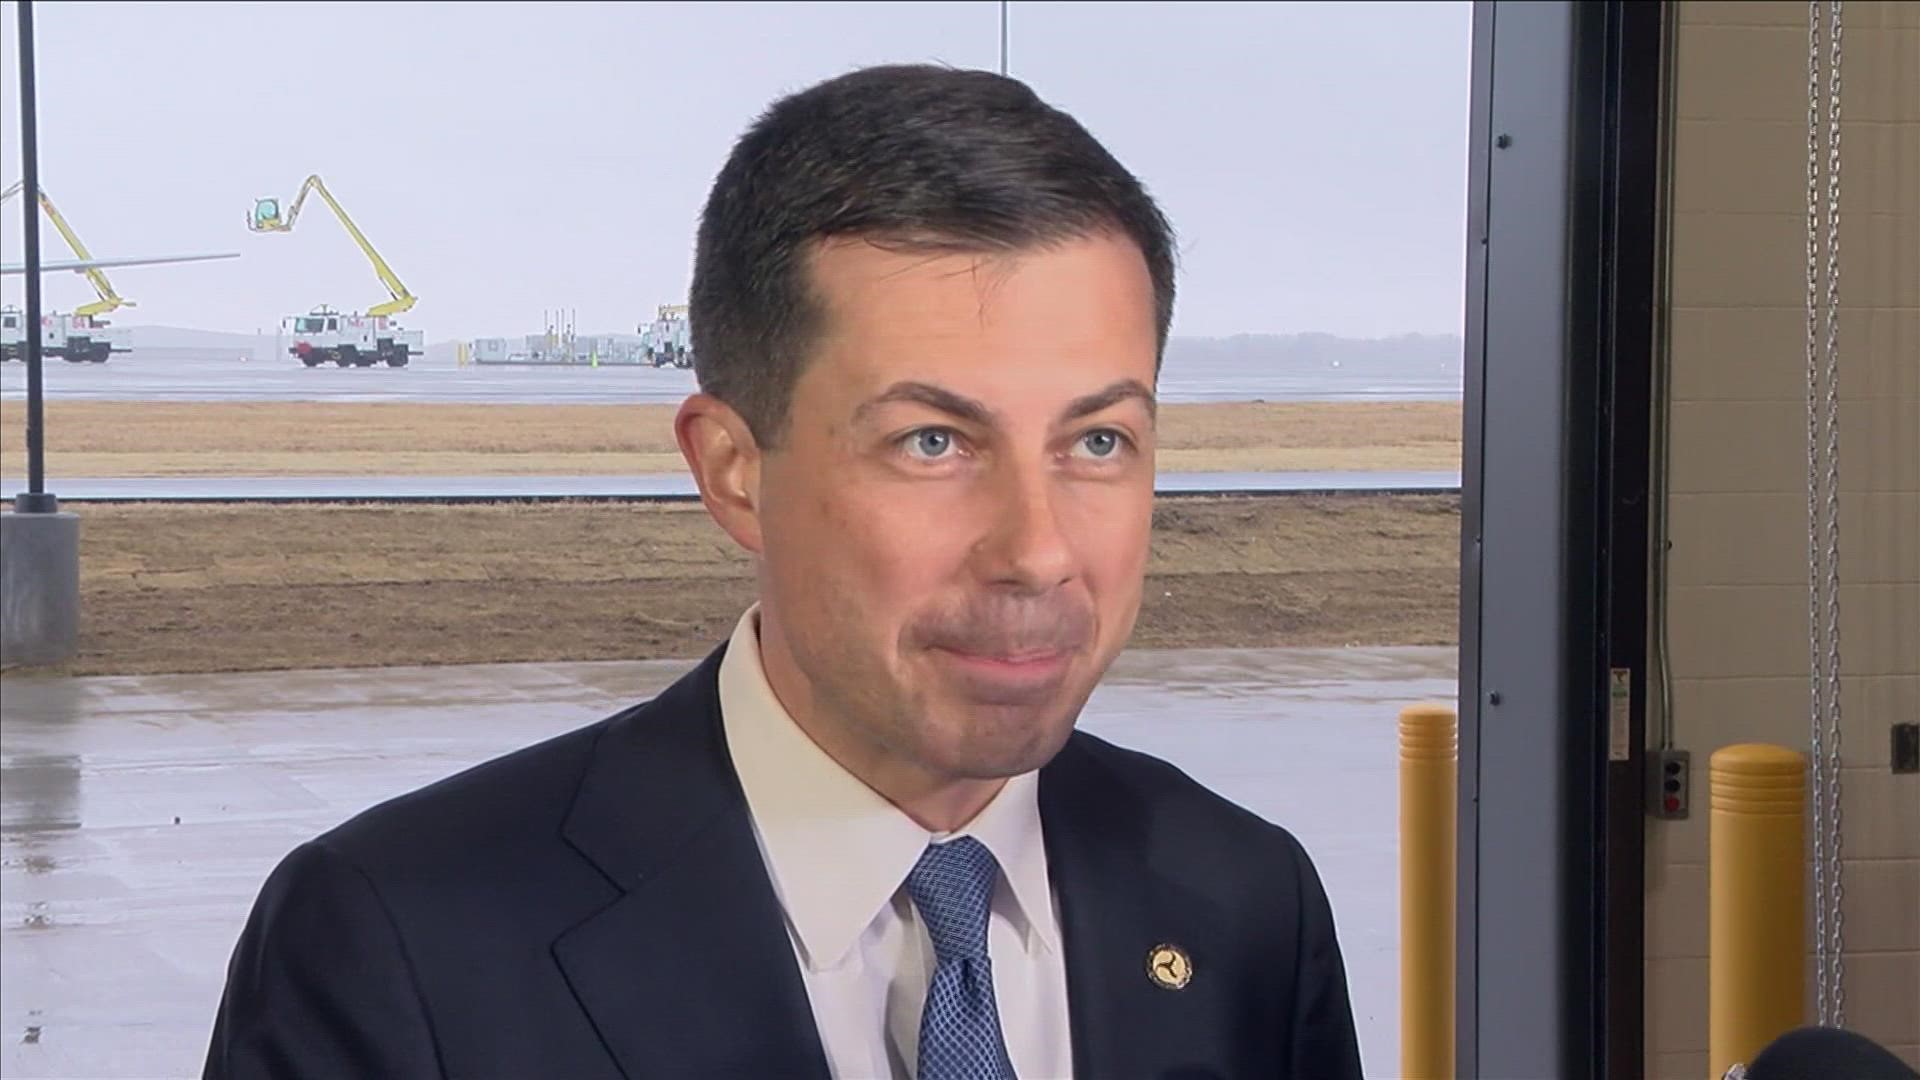 Buttigieg visited Memphis International Airport, considered a key cargo hub for getting goods from planes to shelves.